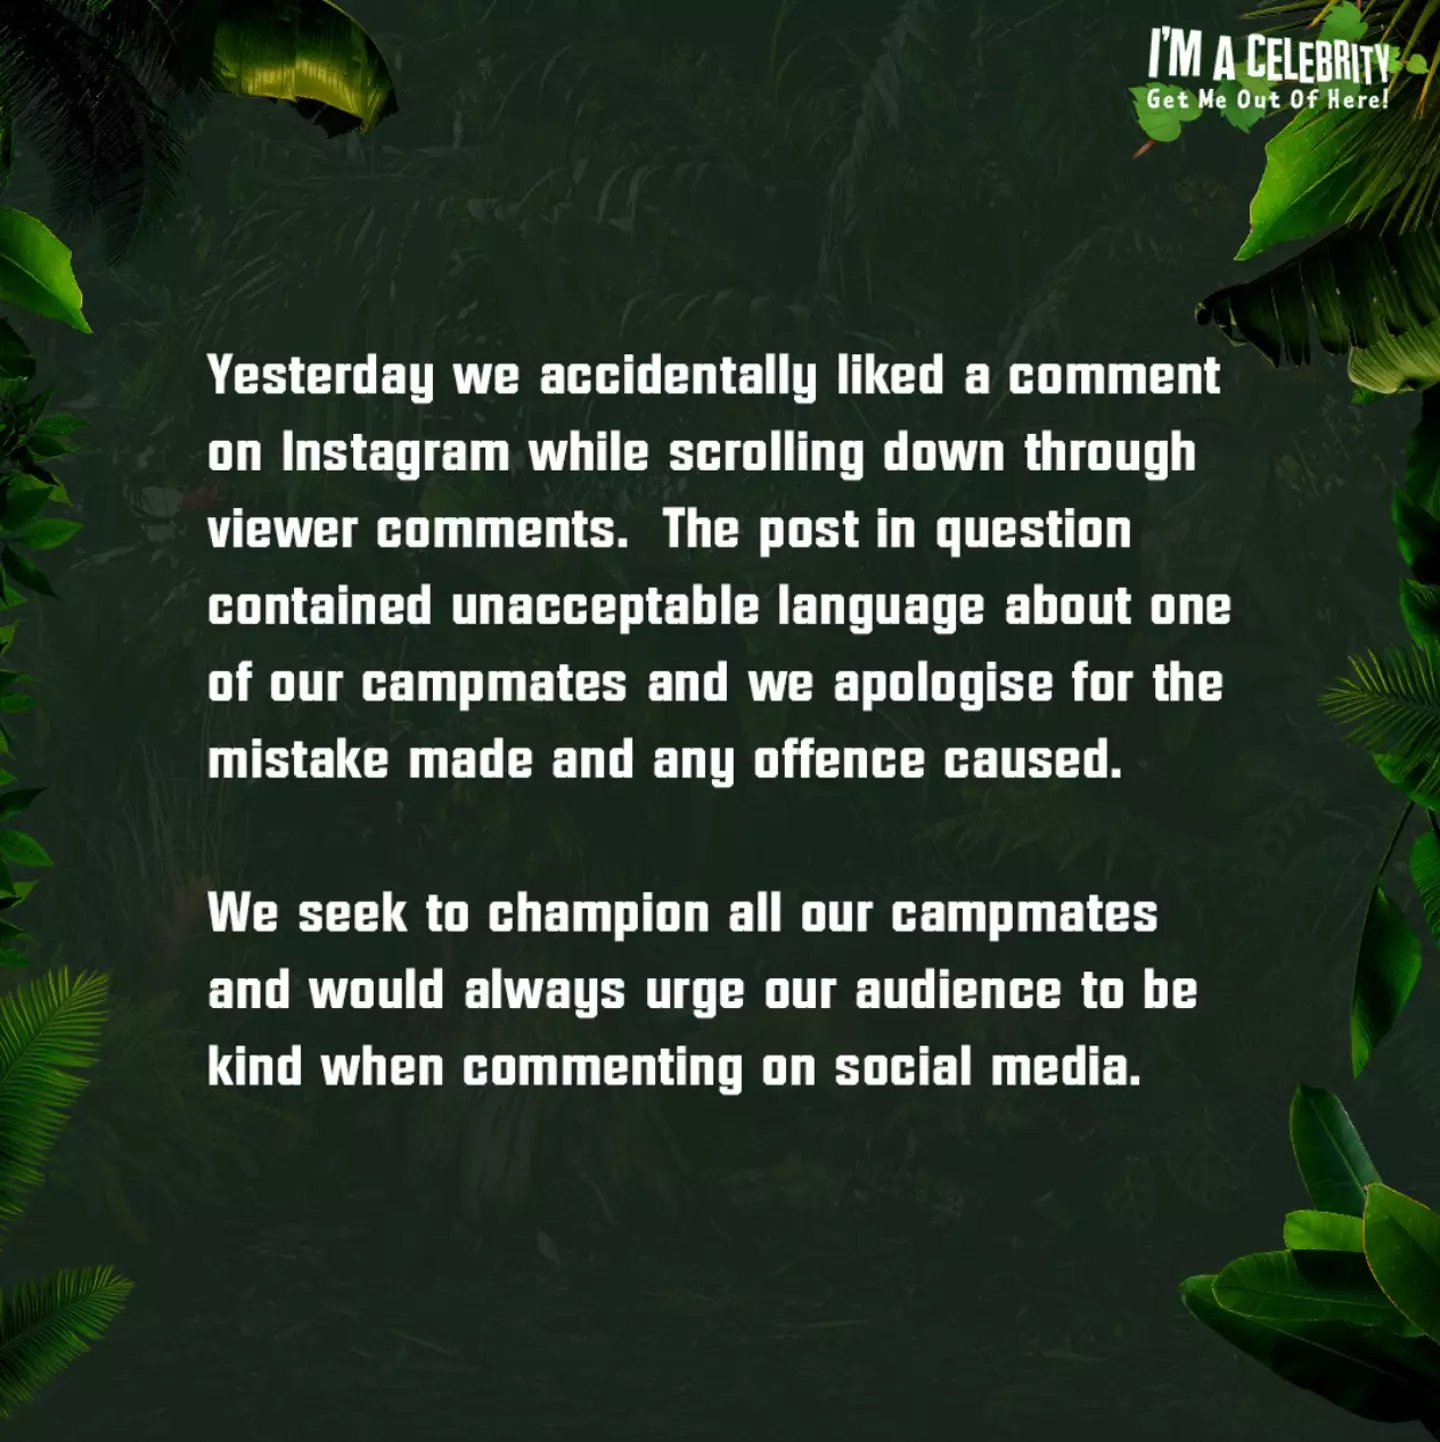 I'm A Celebrity posted an official apology statement on the matter.